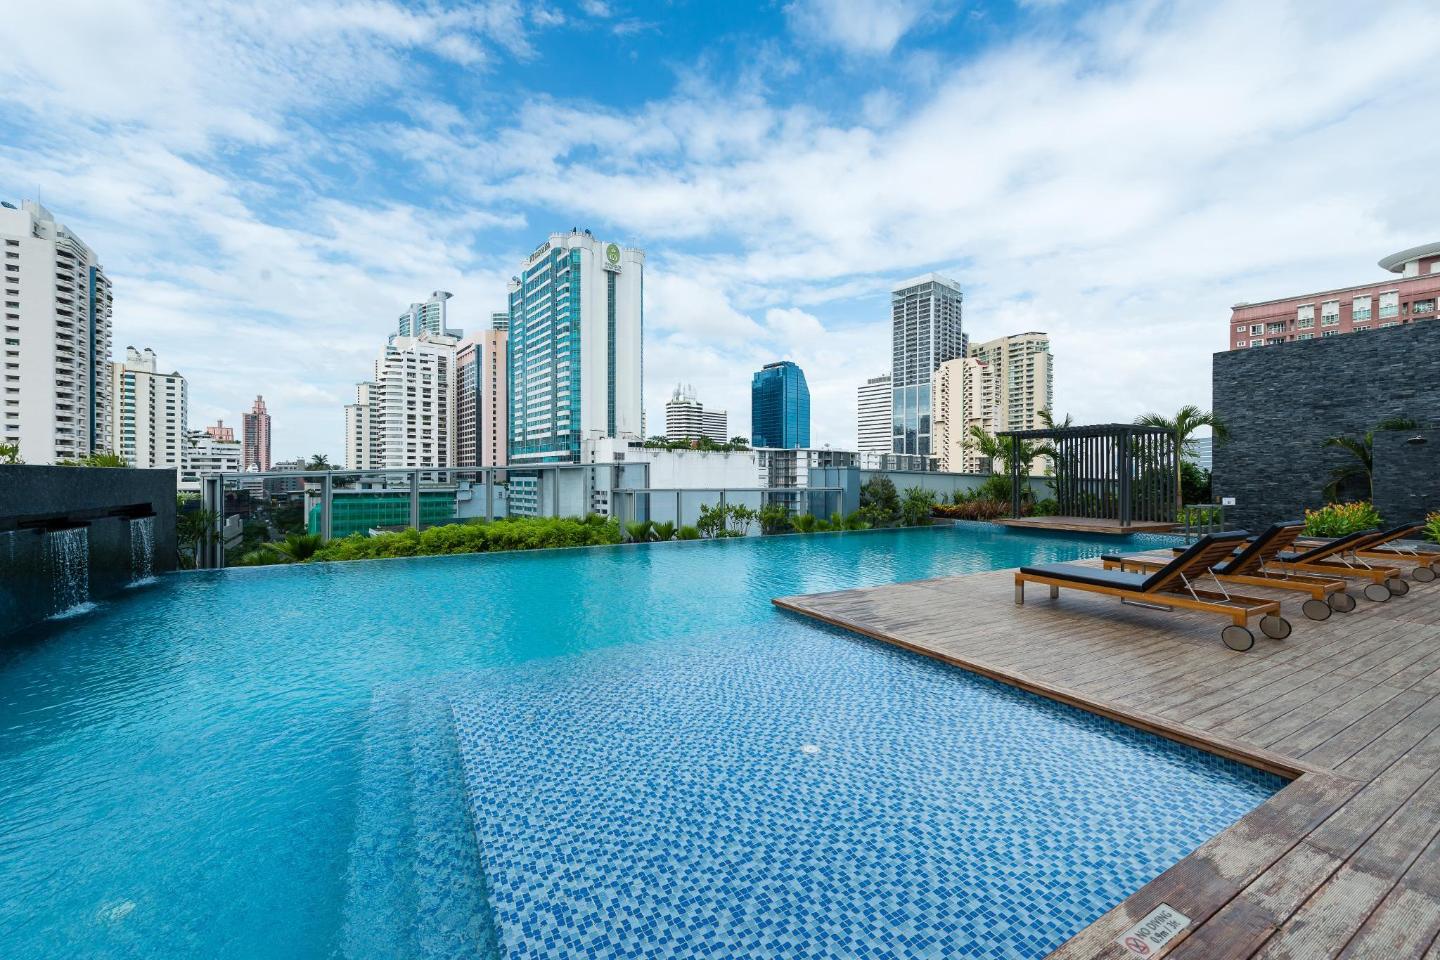 The 10 best hotels with pools in Bangkok, Thailand | Booking.com